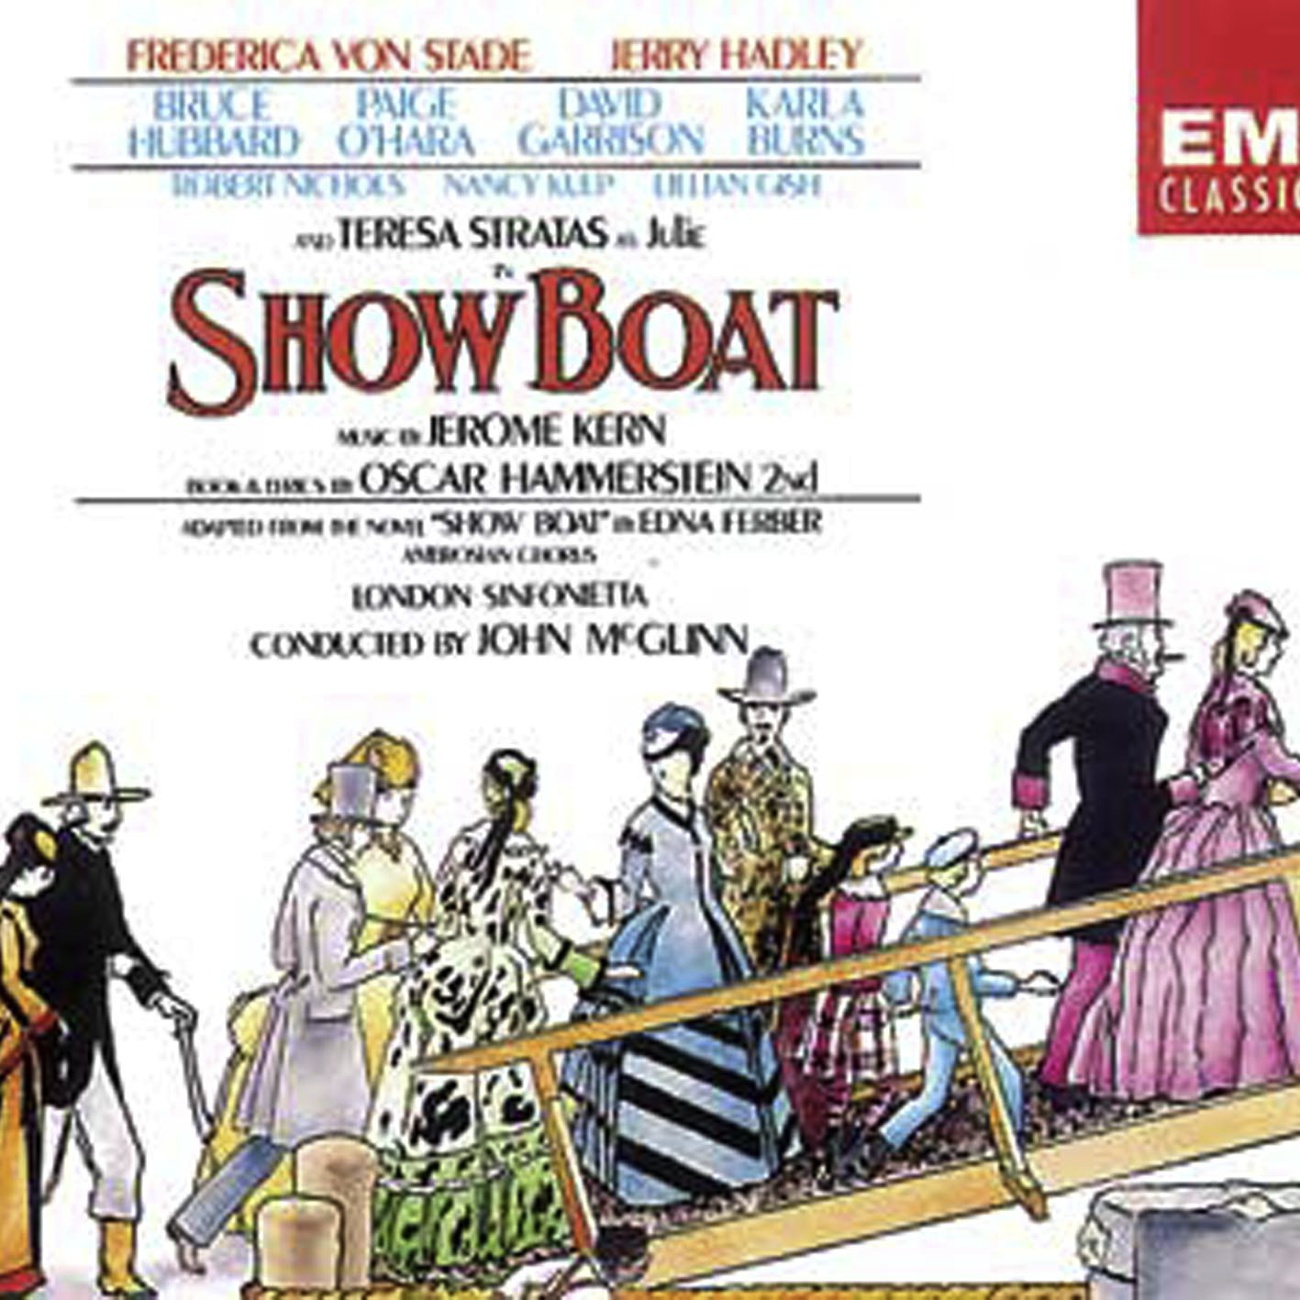 Show Boat, ACT 1, Scene 3: Till good luck comes my way